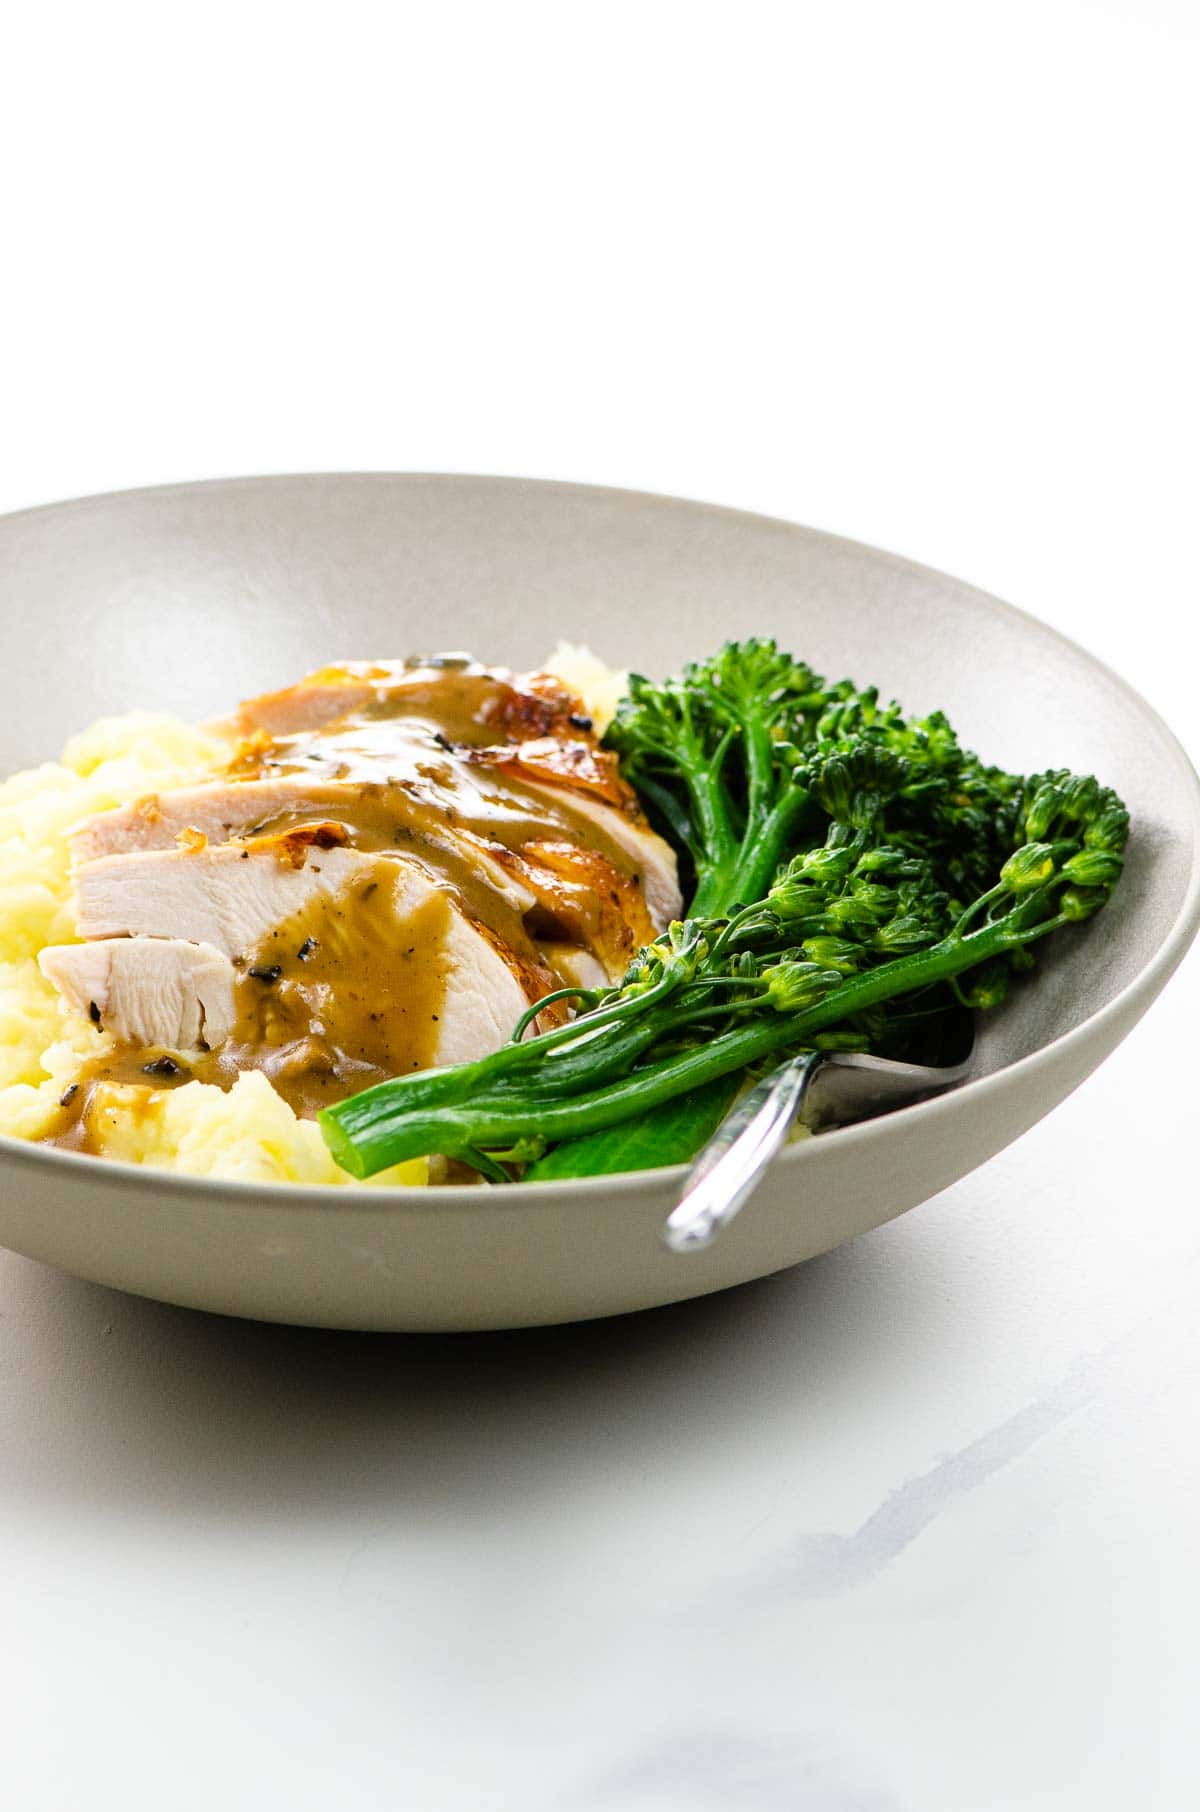 sliced old fashioned roast chicken with gravy over mashed potatoes with broccolini in a bowl